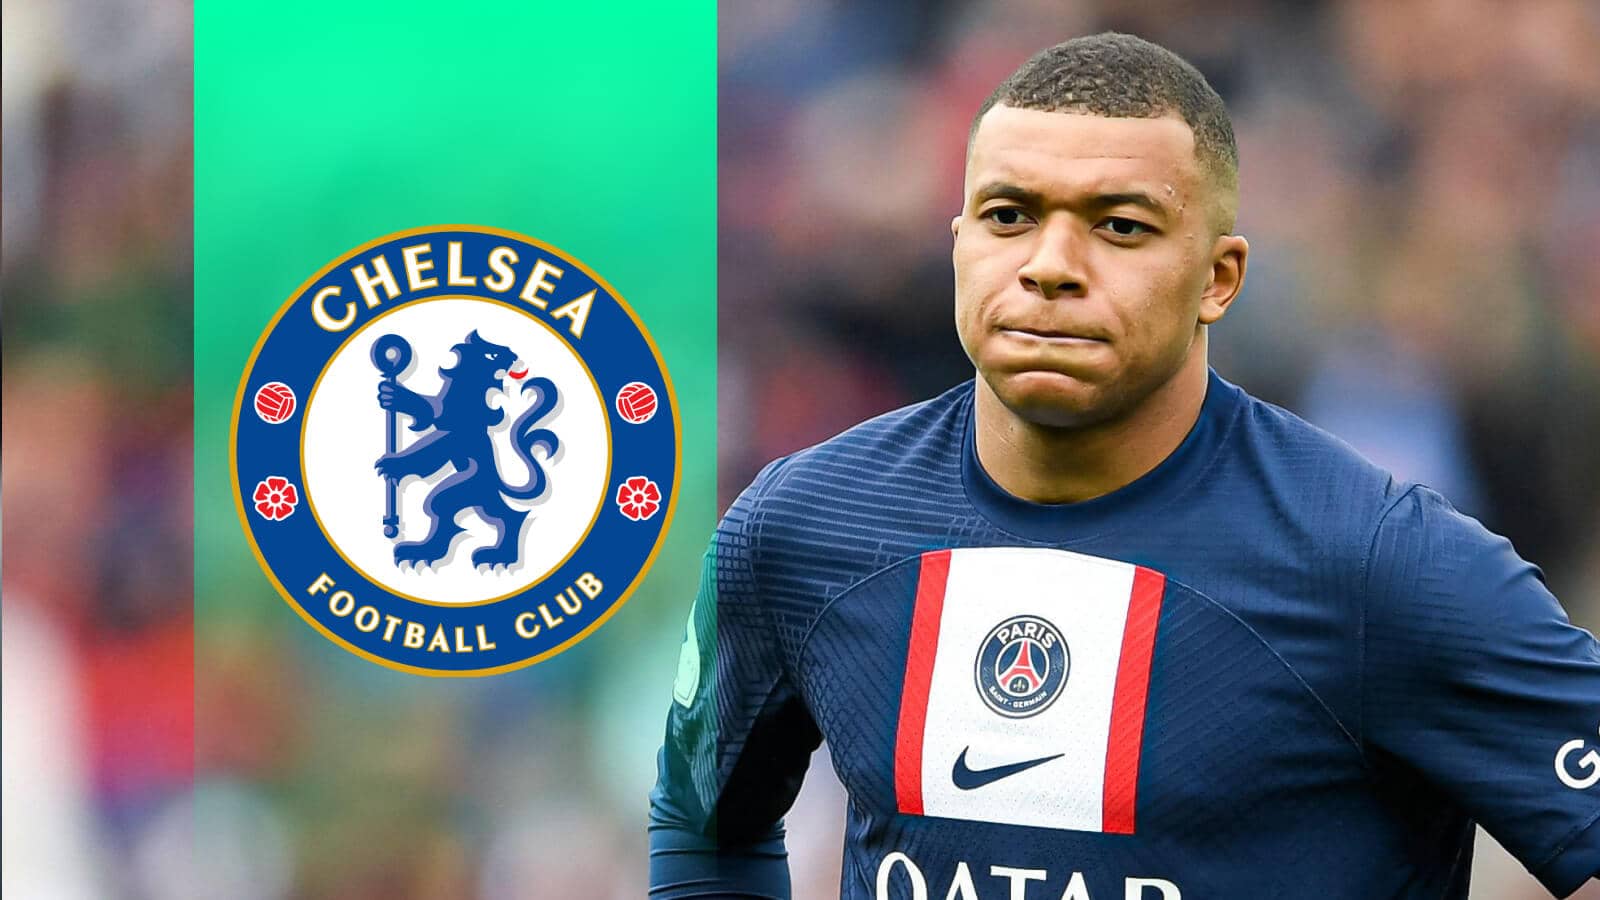 This Is What Kylian Mbappe Has Responded To Chelsea's Offer